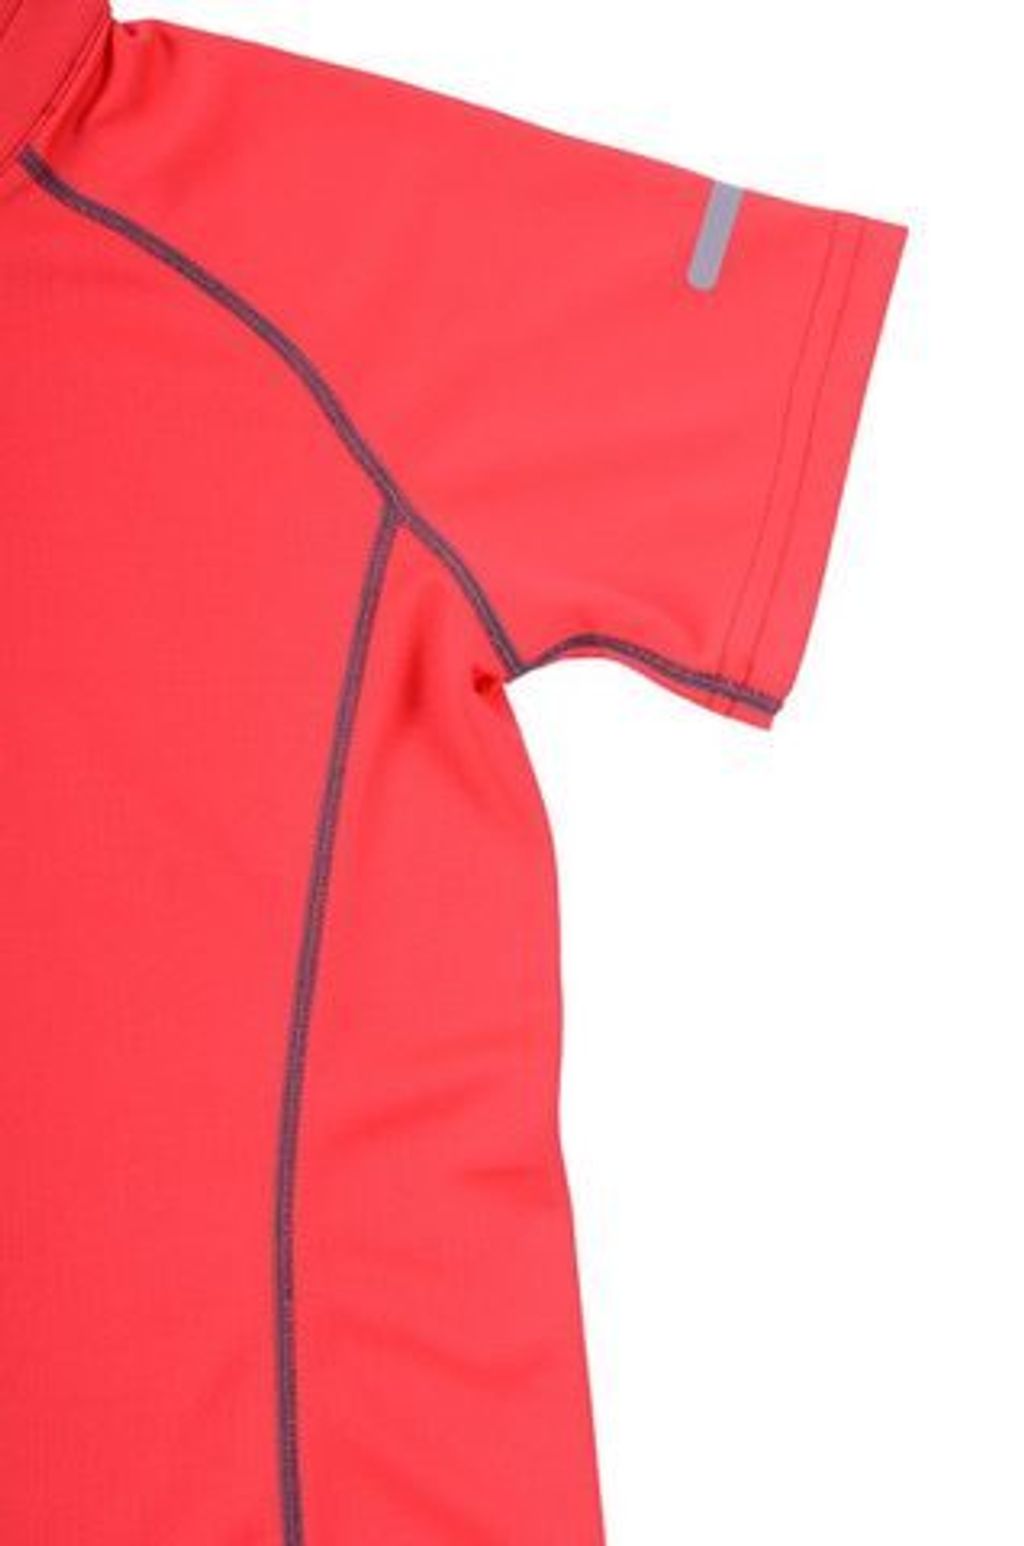 Outrefit Microfiber Reflective Zipped Design MOZ 4512 Classic Red Hand View.jpeg